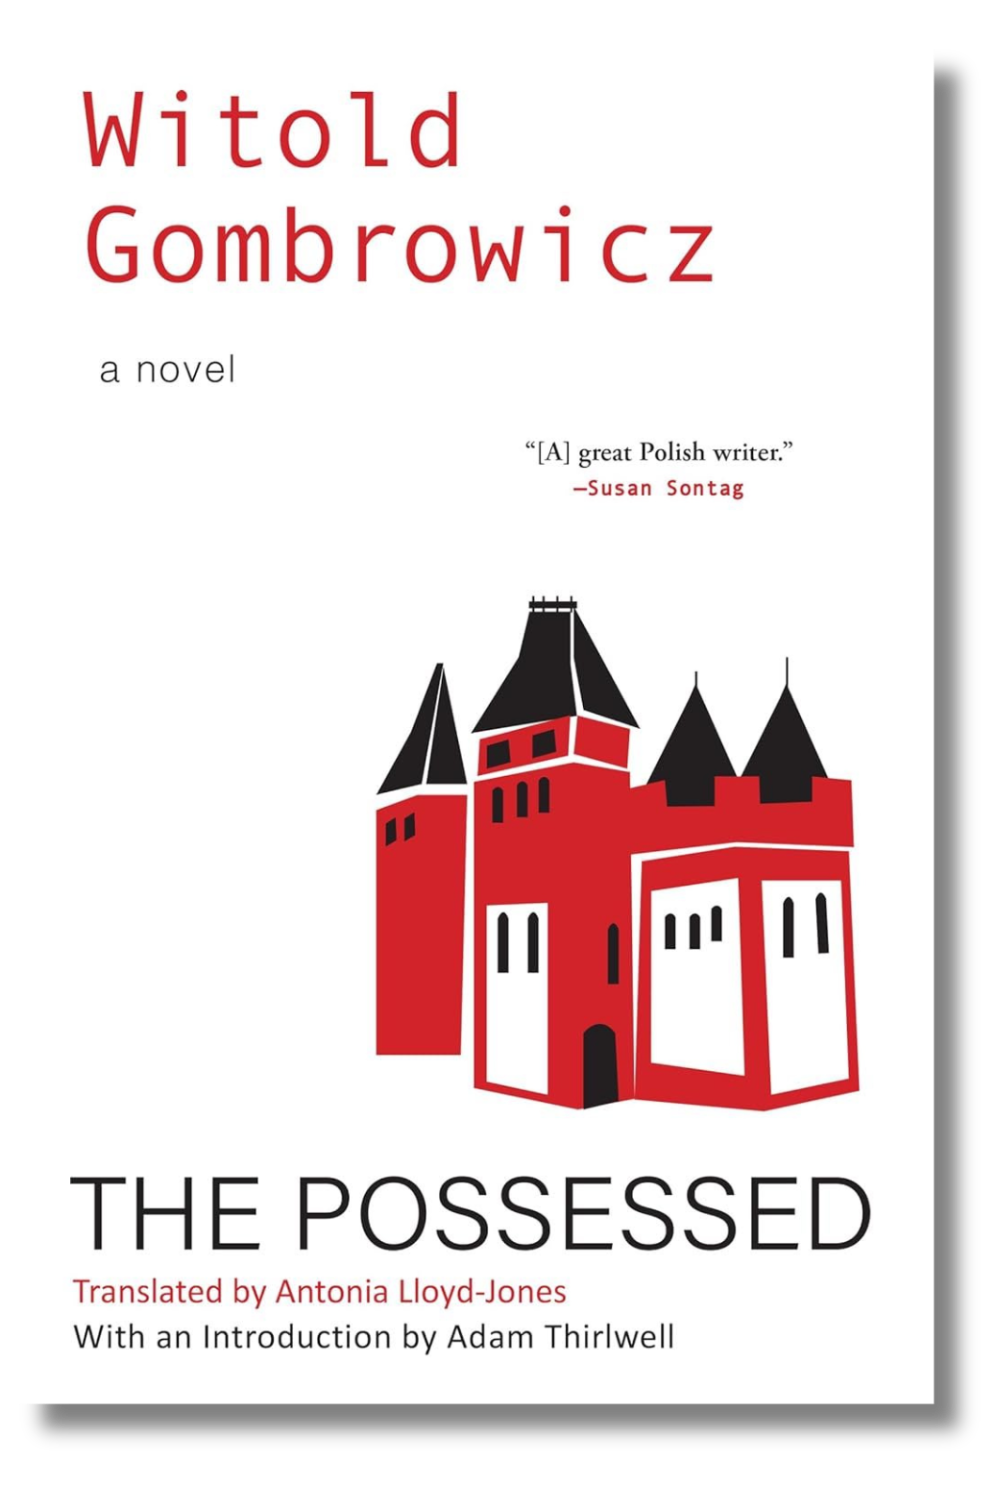 The cover of "The Possessed" by Witold Gombrowicz, tr. by Antonia Lloyd-Jones